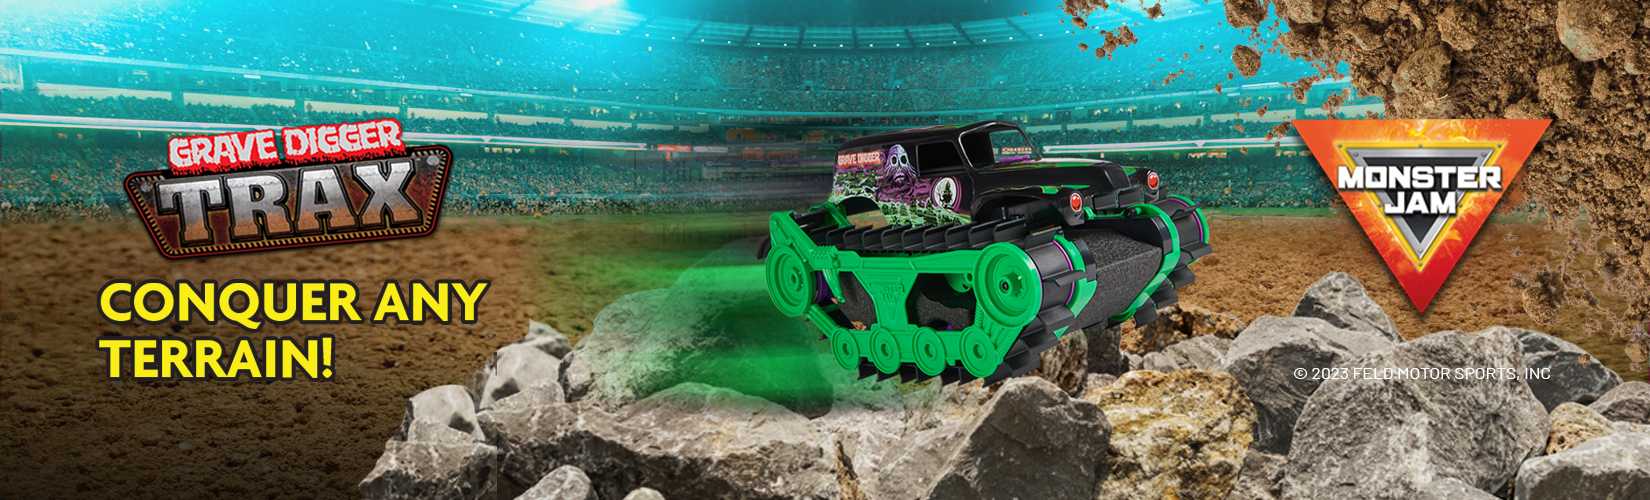 Monster Jam. Grave digger trax. Conquer any terrain!